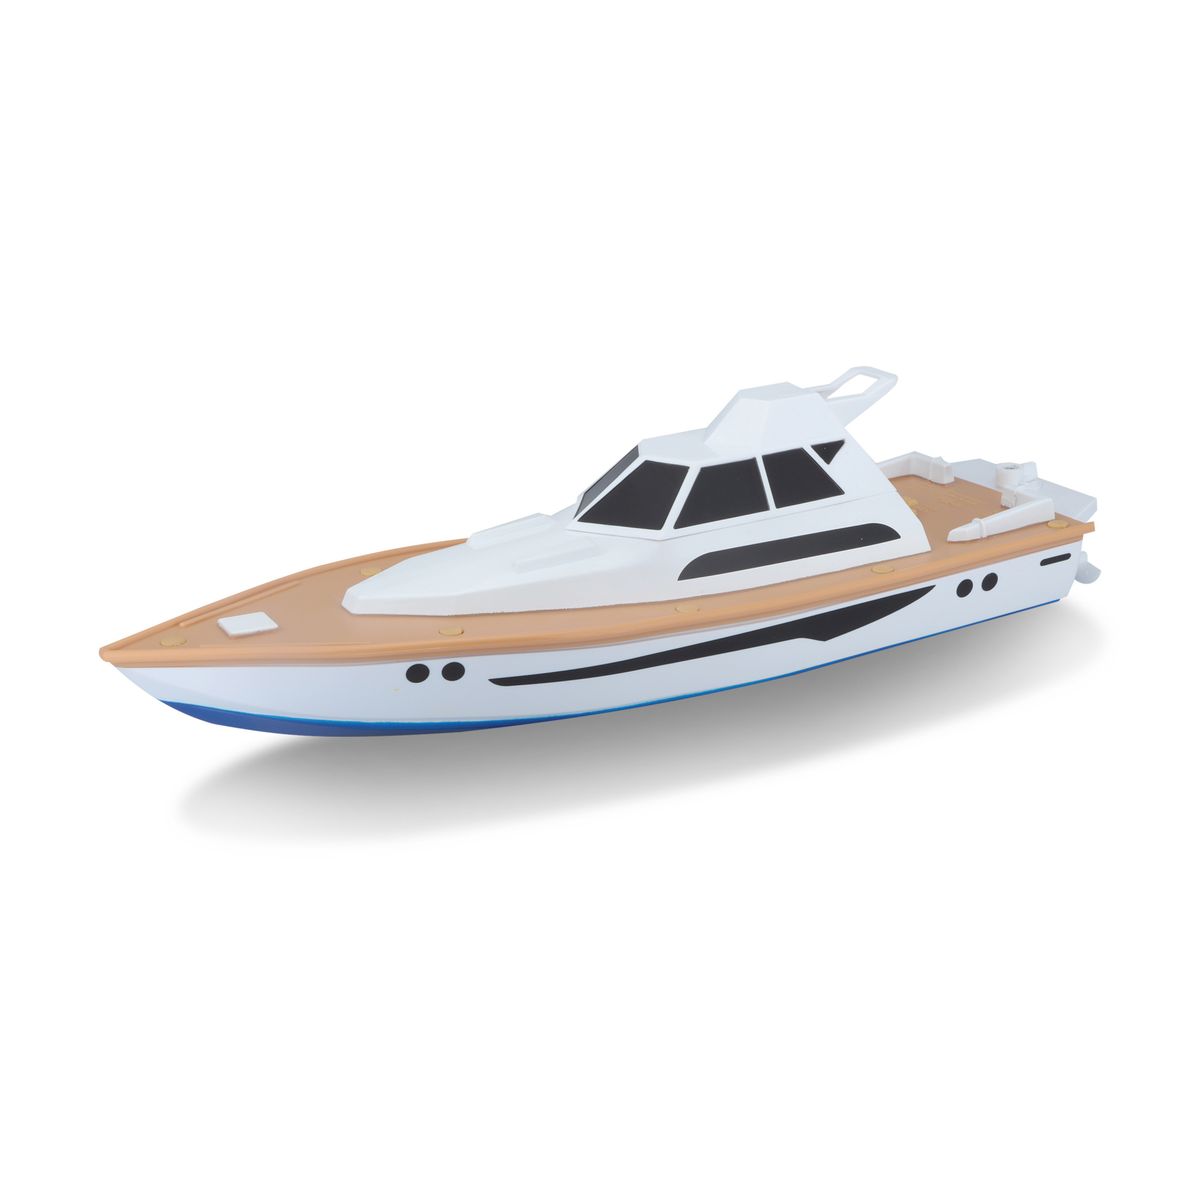 Maisto R/C Super Yacht Boat - White/Brown/Blue (34cm Long) | Buy Online in  South Africa 